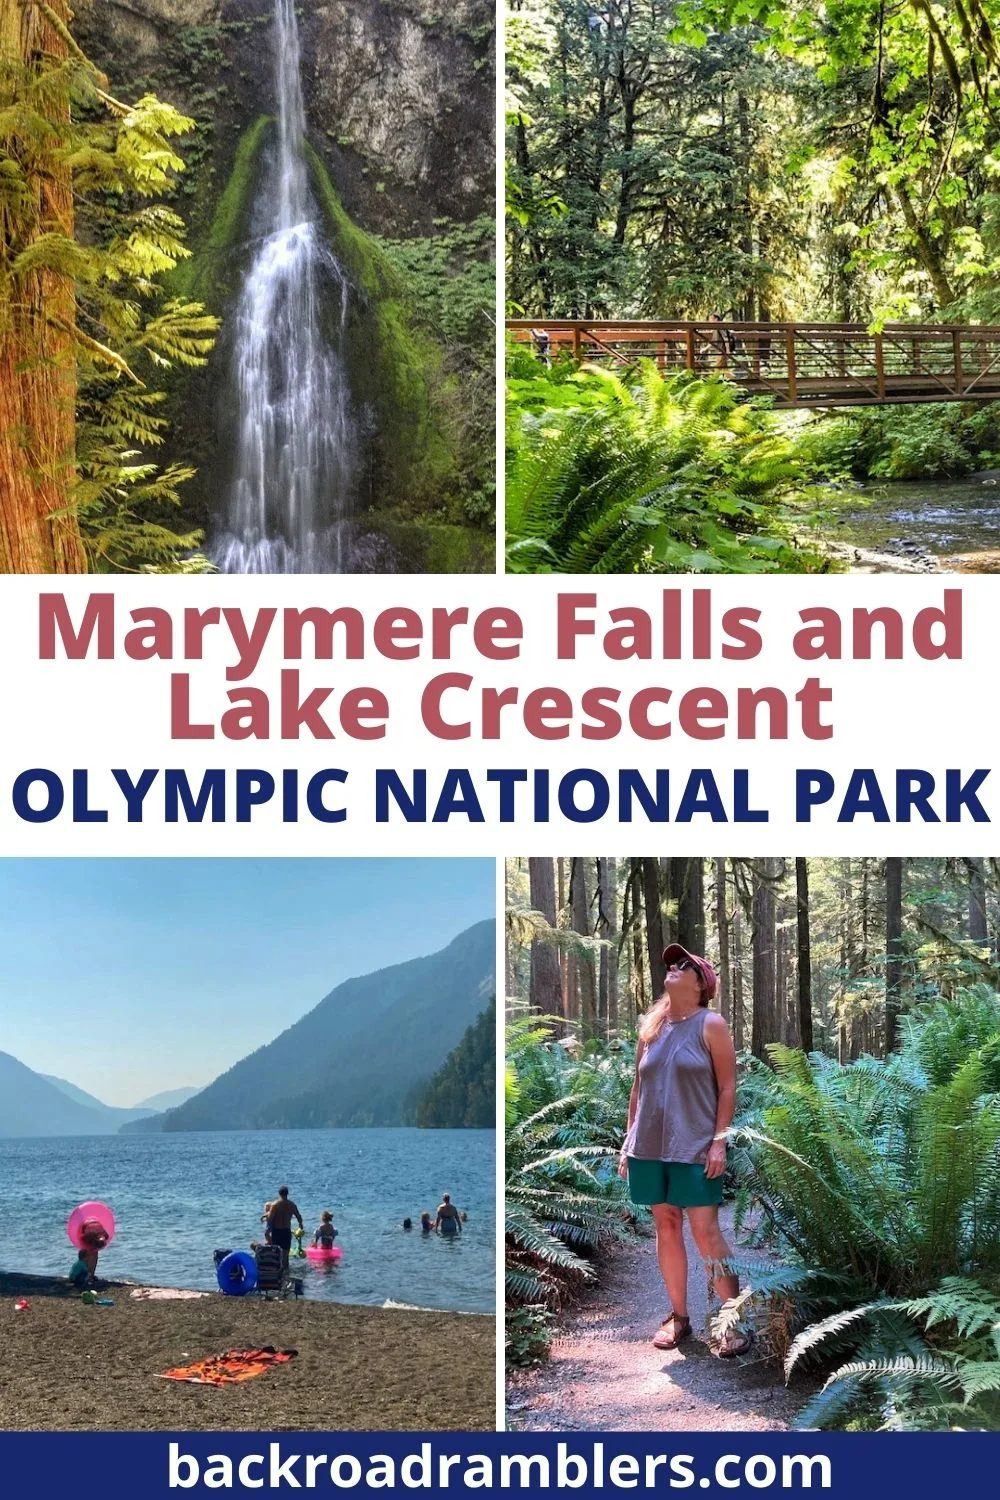 A collage of photos featuring Marymere Falls and Olympic National Park. Text overlay: Marymere Falls and Lake Crescent in Olympic National Park.